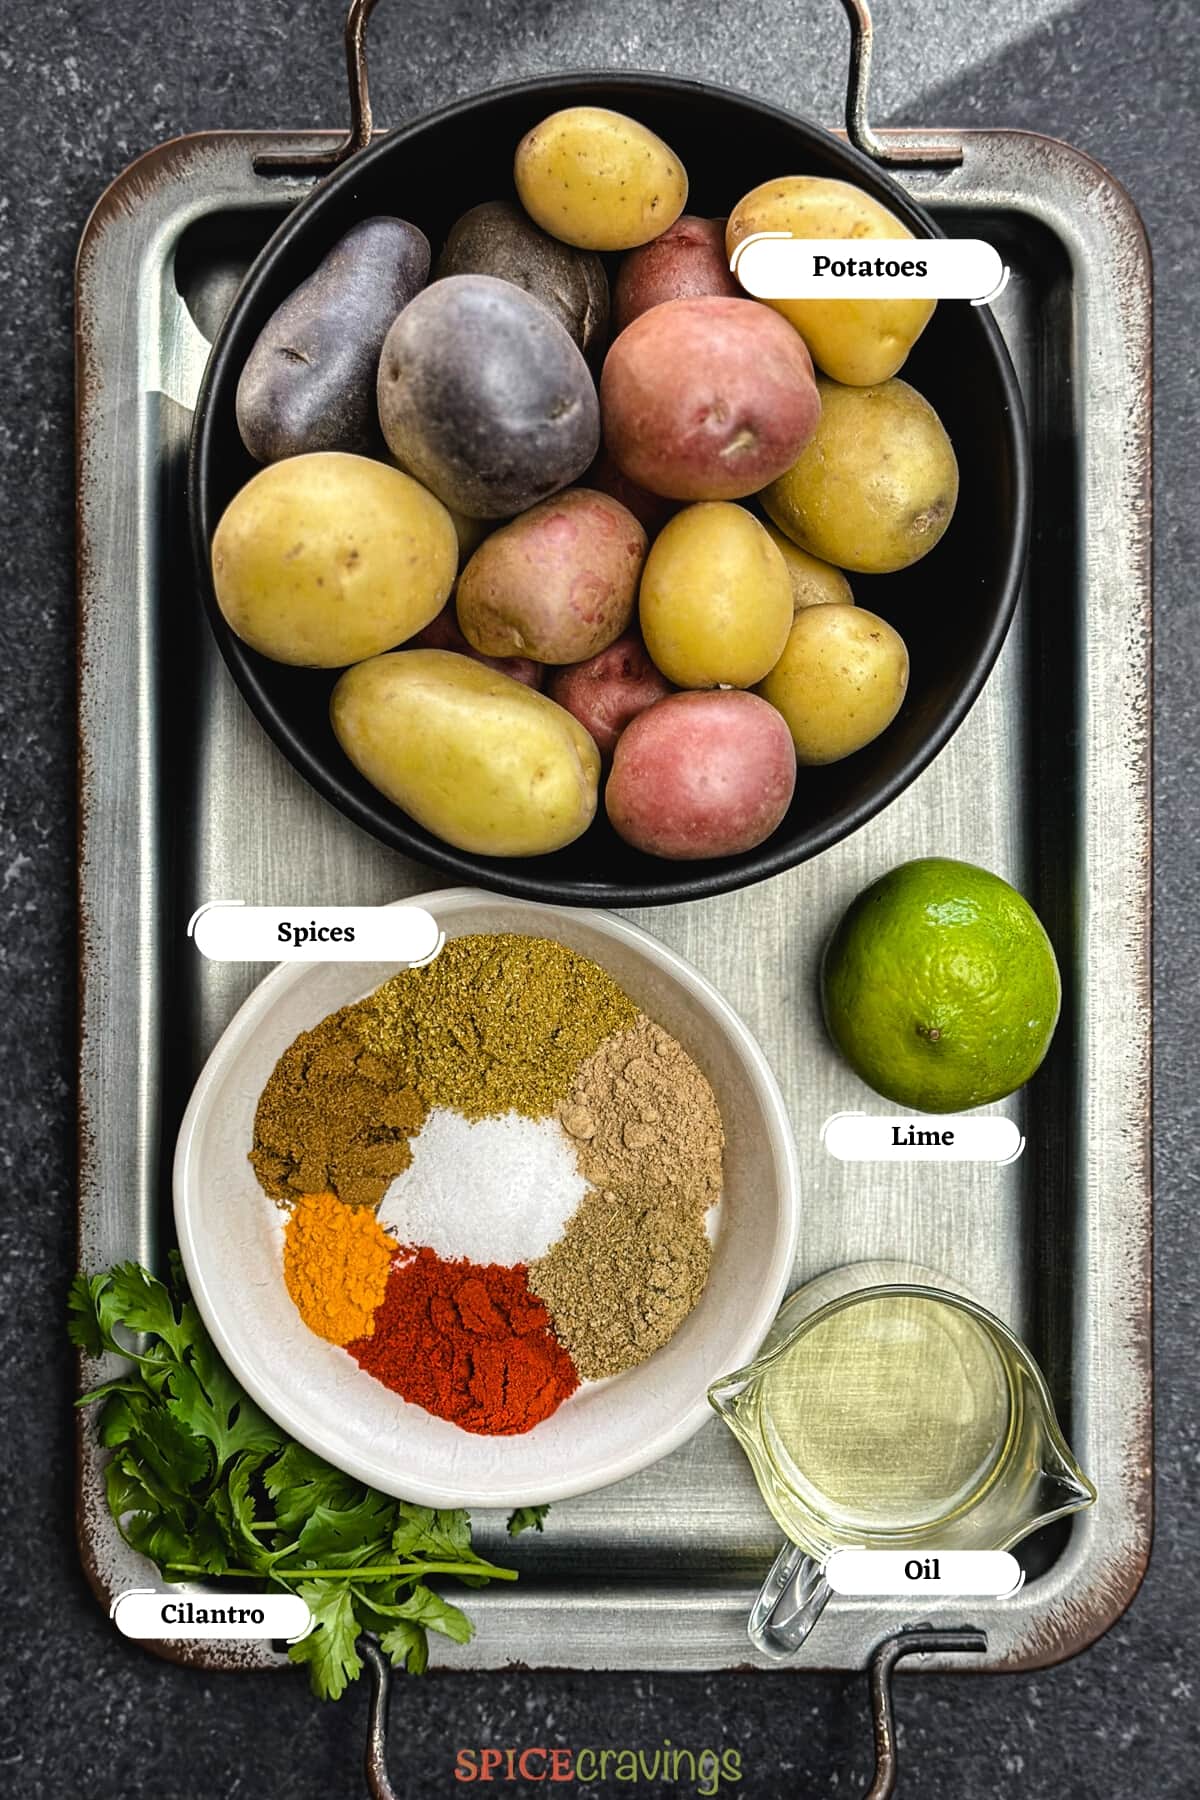 Ingredients including potato, spices, lime on metal tray